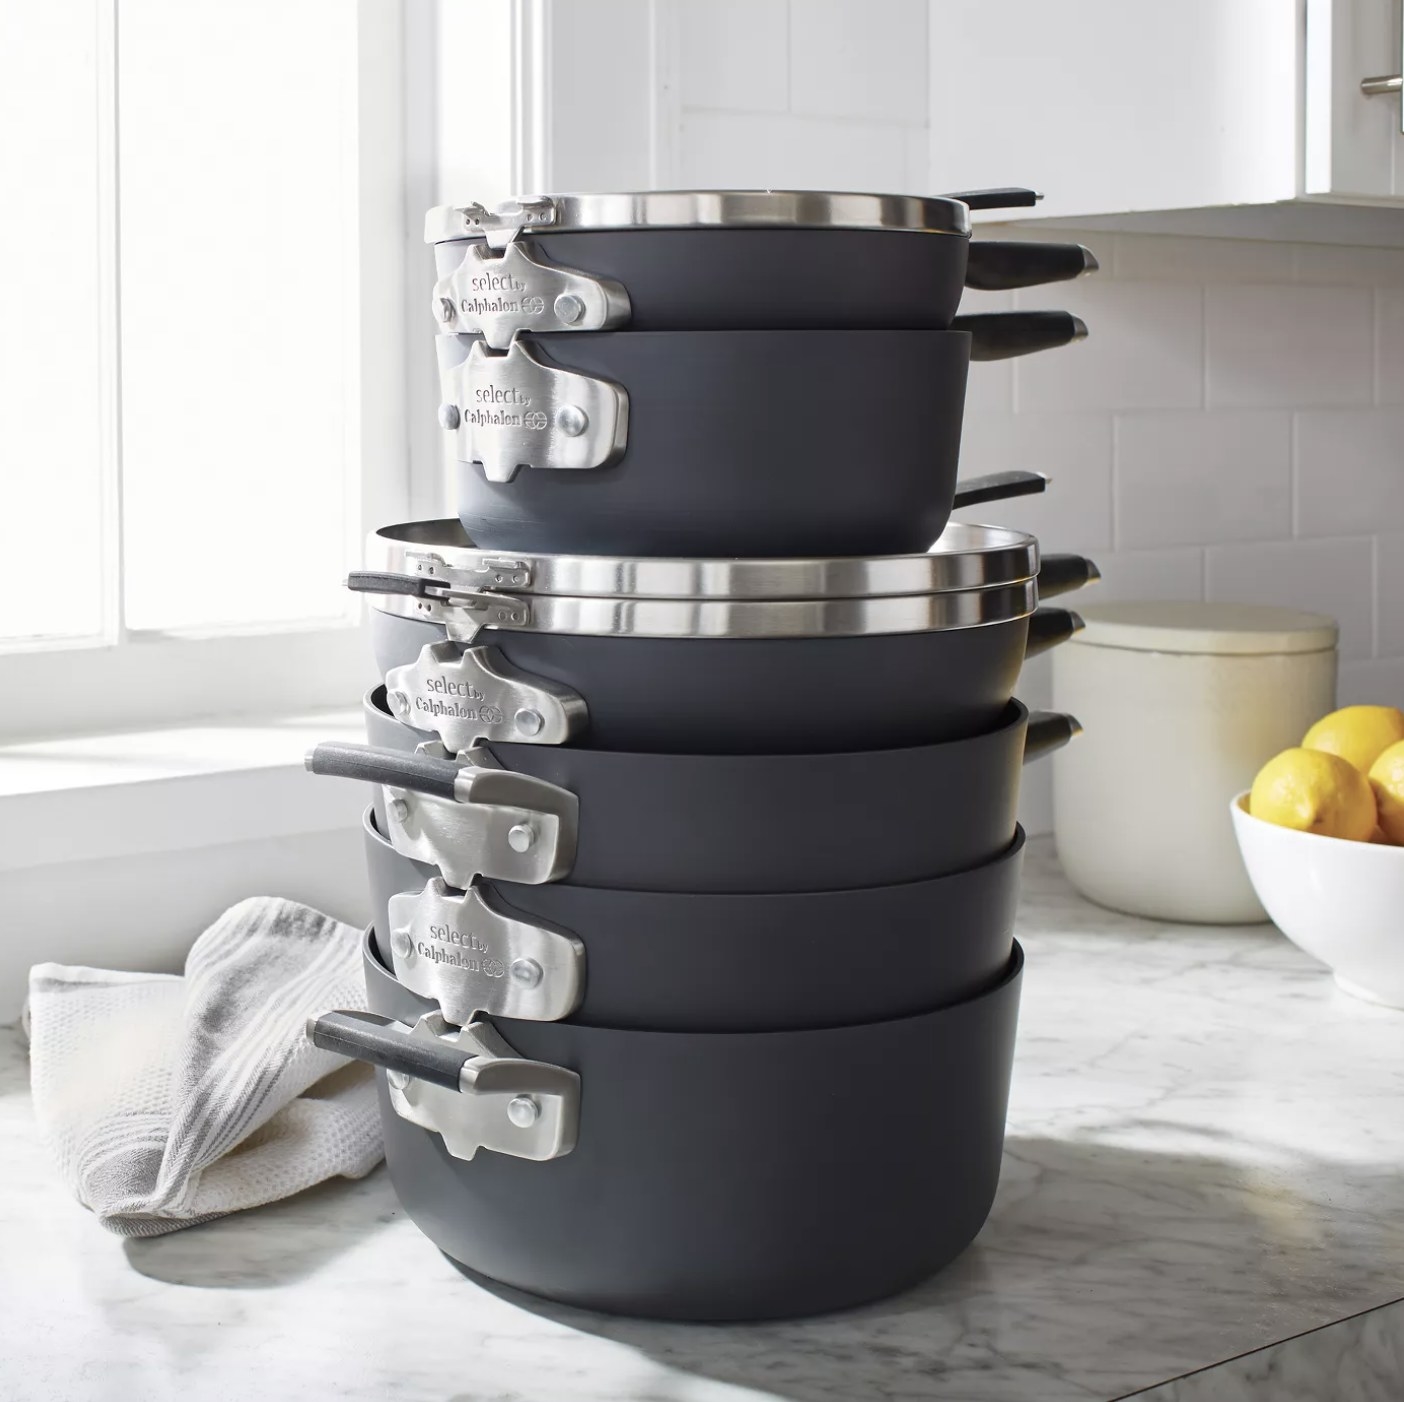 The cookware set